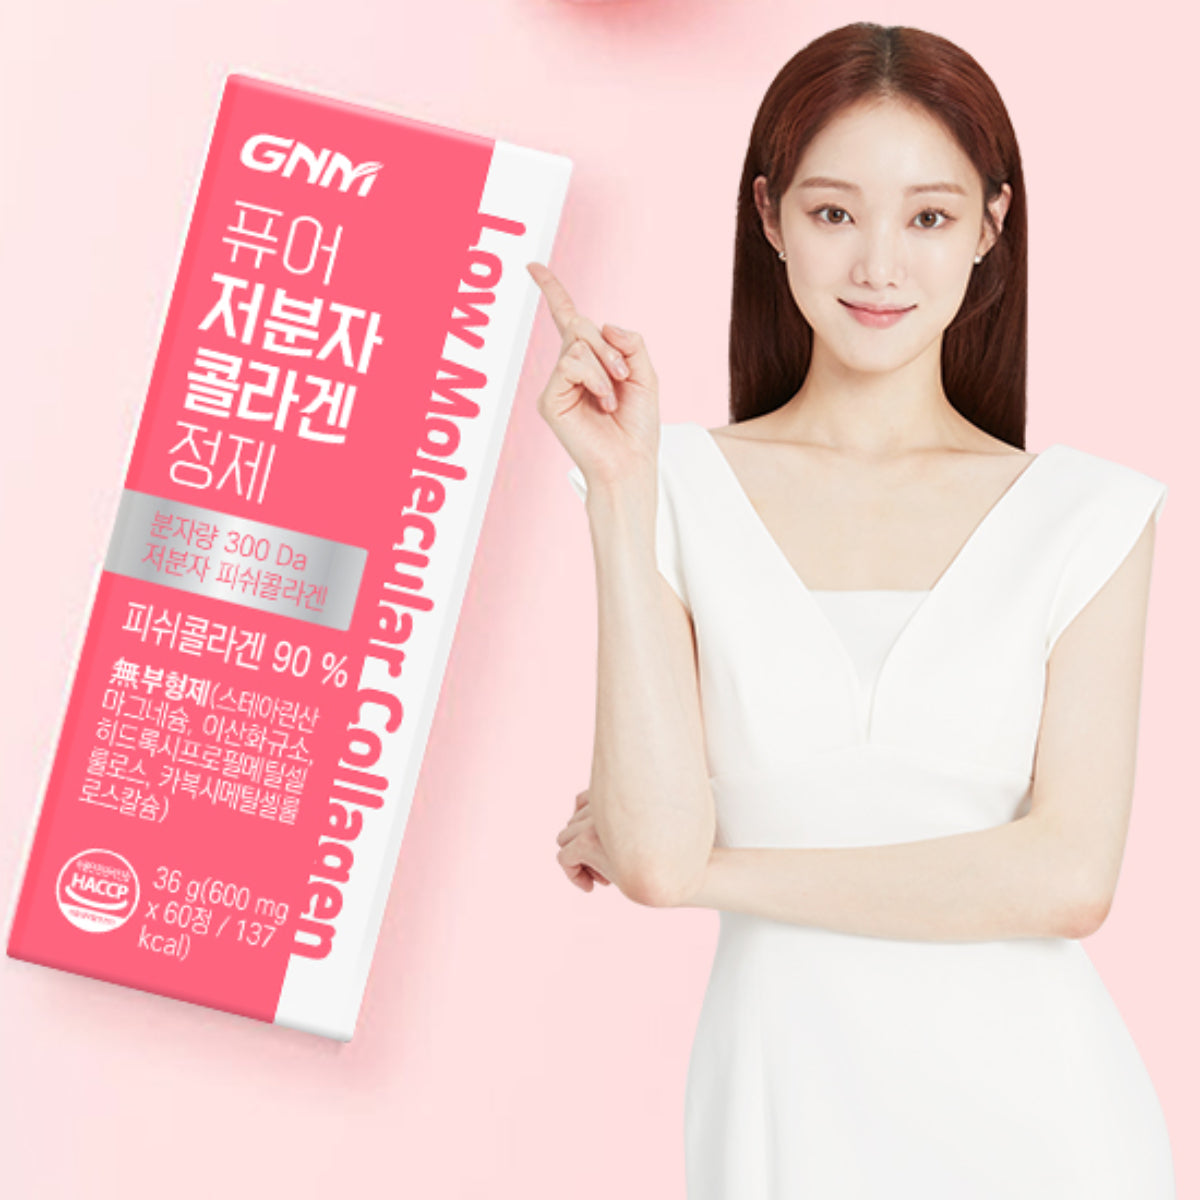 GNM Pure Low Molecular Fish Collagen Tablets 3 bottles (180 Tablets) Vitamin C Hyaluronic Acid / from Seoul, Korea